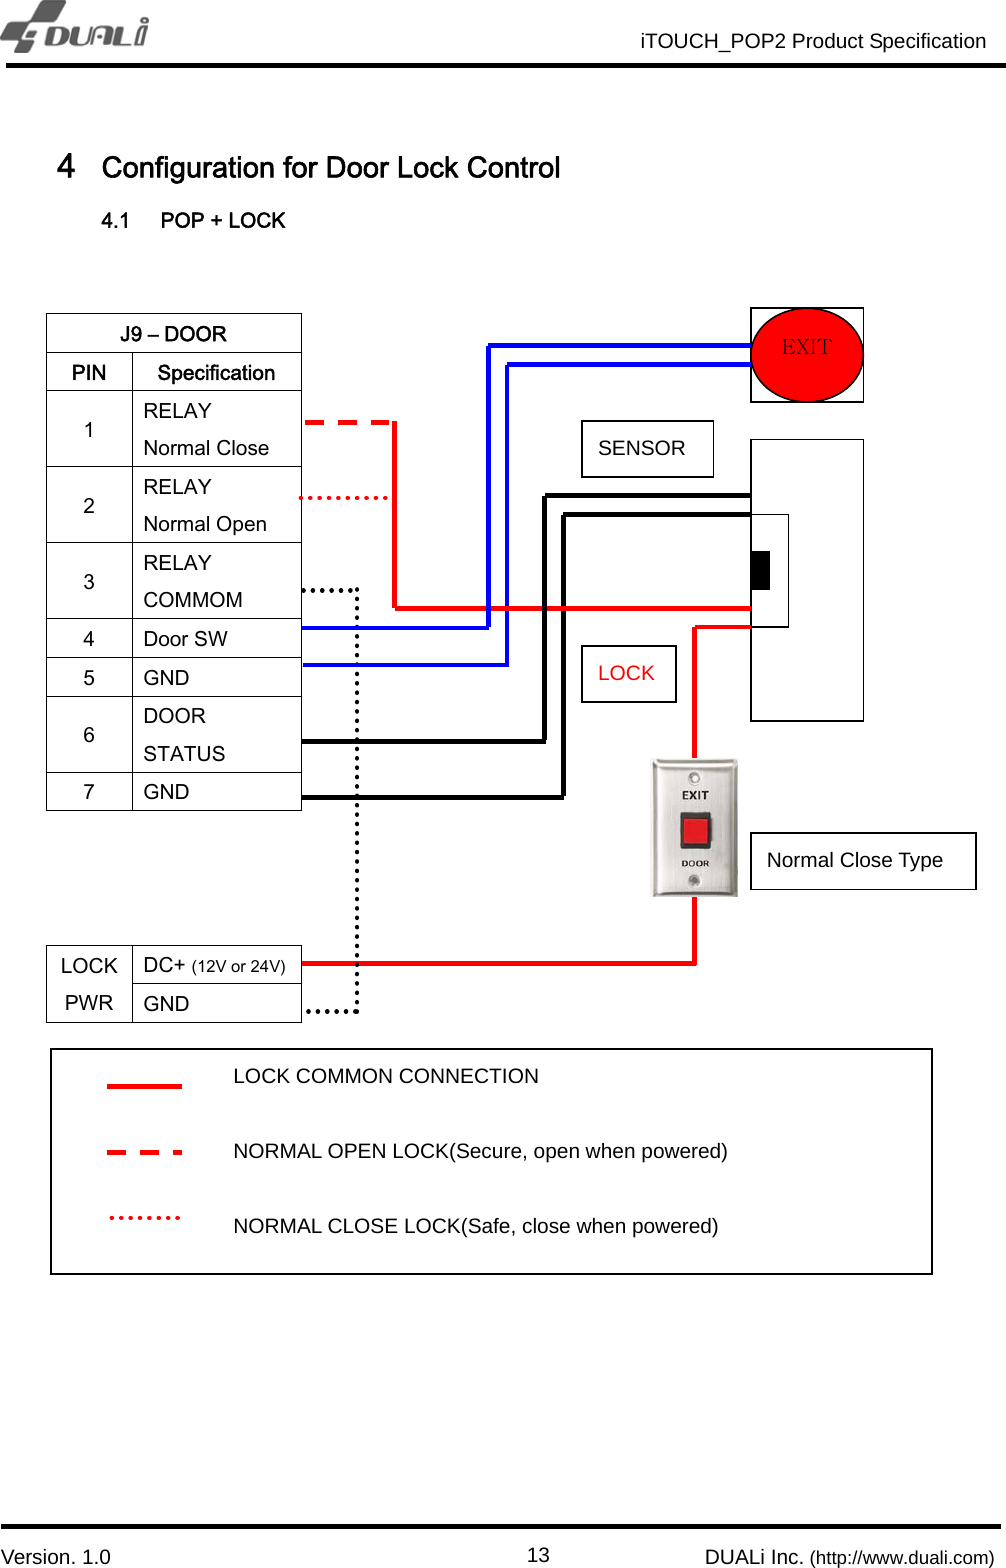                                                          iTOUCH_POP2 Product Specification                          `  Version. 1.0                                                         DUALi Inc. (http://www.duali.com)  134 Configuration for Door Lock Control   4.1 POP + LOCK                           J9 – DOOR PIN  Specification 1  RELAY   Normal Close   2  RELAY   Normal Open 3  RELAY COMMOM 4  Door SW 5  GND 6  DOOR STATUS 7  GND LOCK PWR DC+ (12V or 24V) GND   LOCK COMMON CONNECTION    NORMAL OPEN LOCK(Secure, open when powered)      NORMAL CLOSE LOCK(Safe, close when powered) EXIT SENSOR LOCK Normal Close Type 